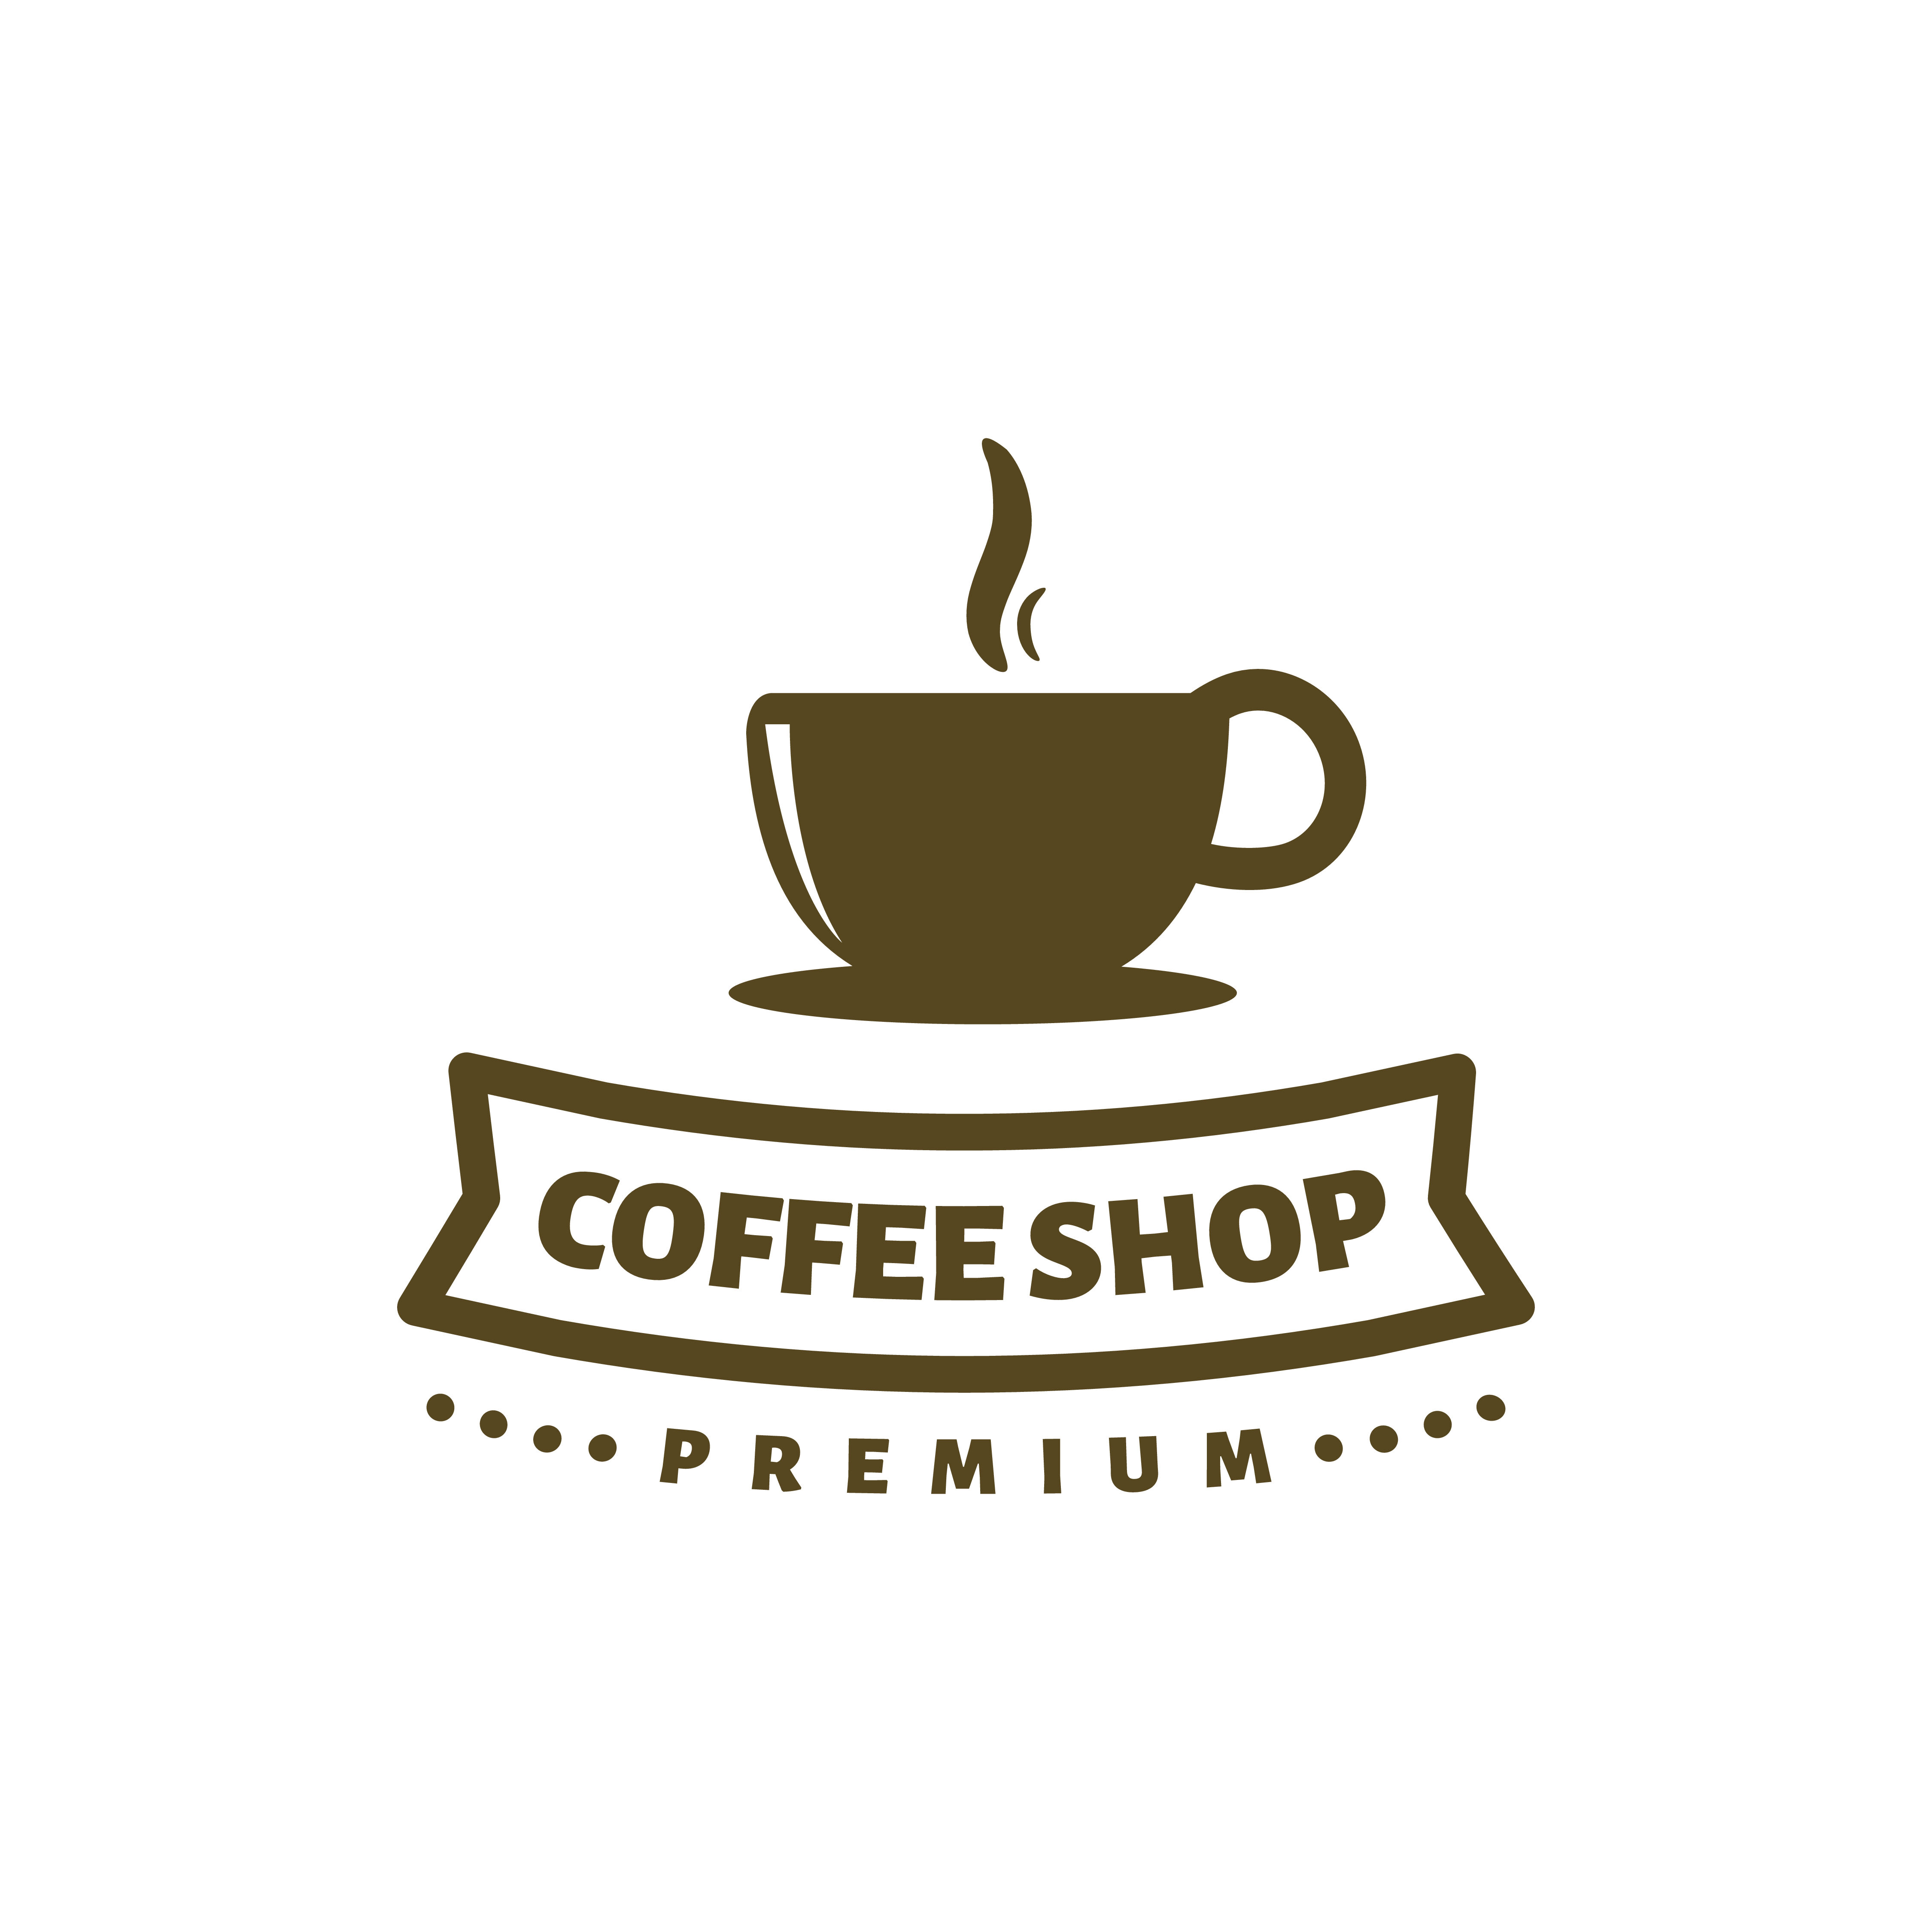 coffee shop logo template vector for premium coffee business By